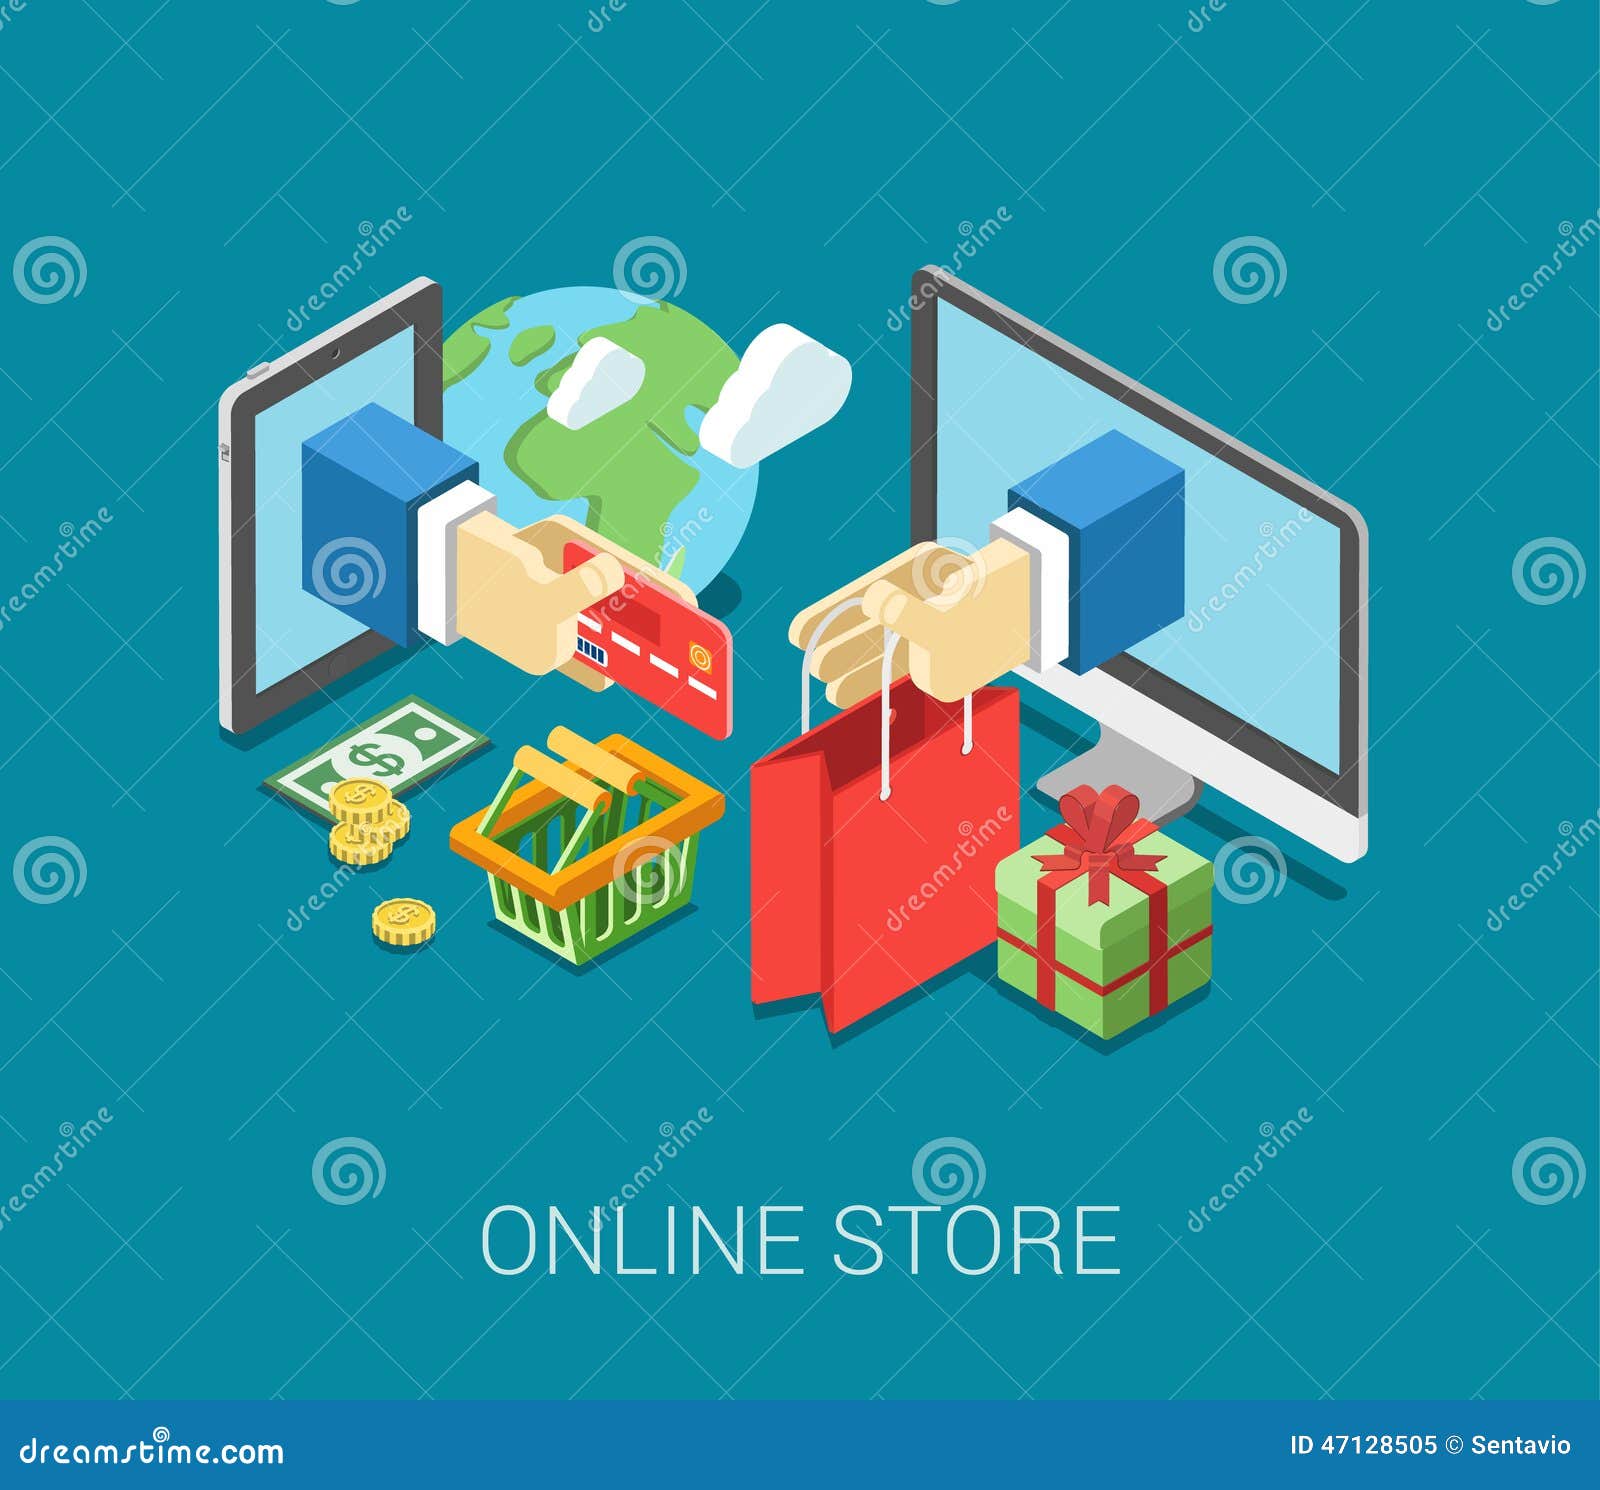 flat-d-isometric-online-store-e-commerce-web-infographic-concept-vector-internet-sale-shopping-cart-payment-checkout-gift-box-hand-47128505.jpg